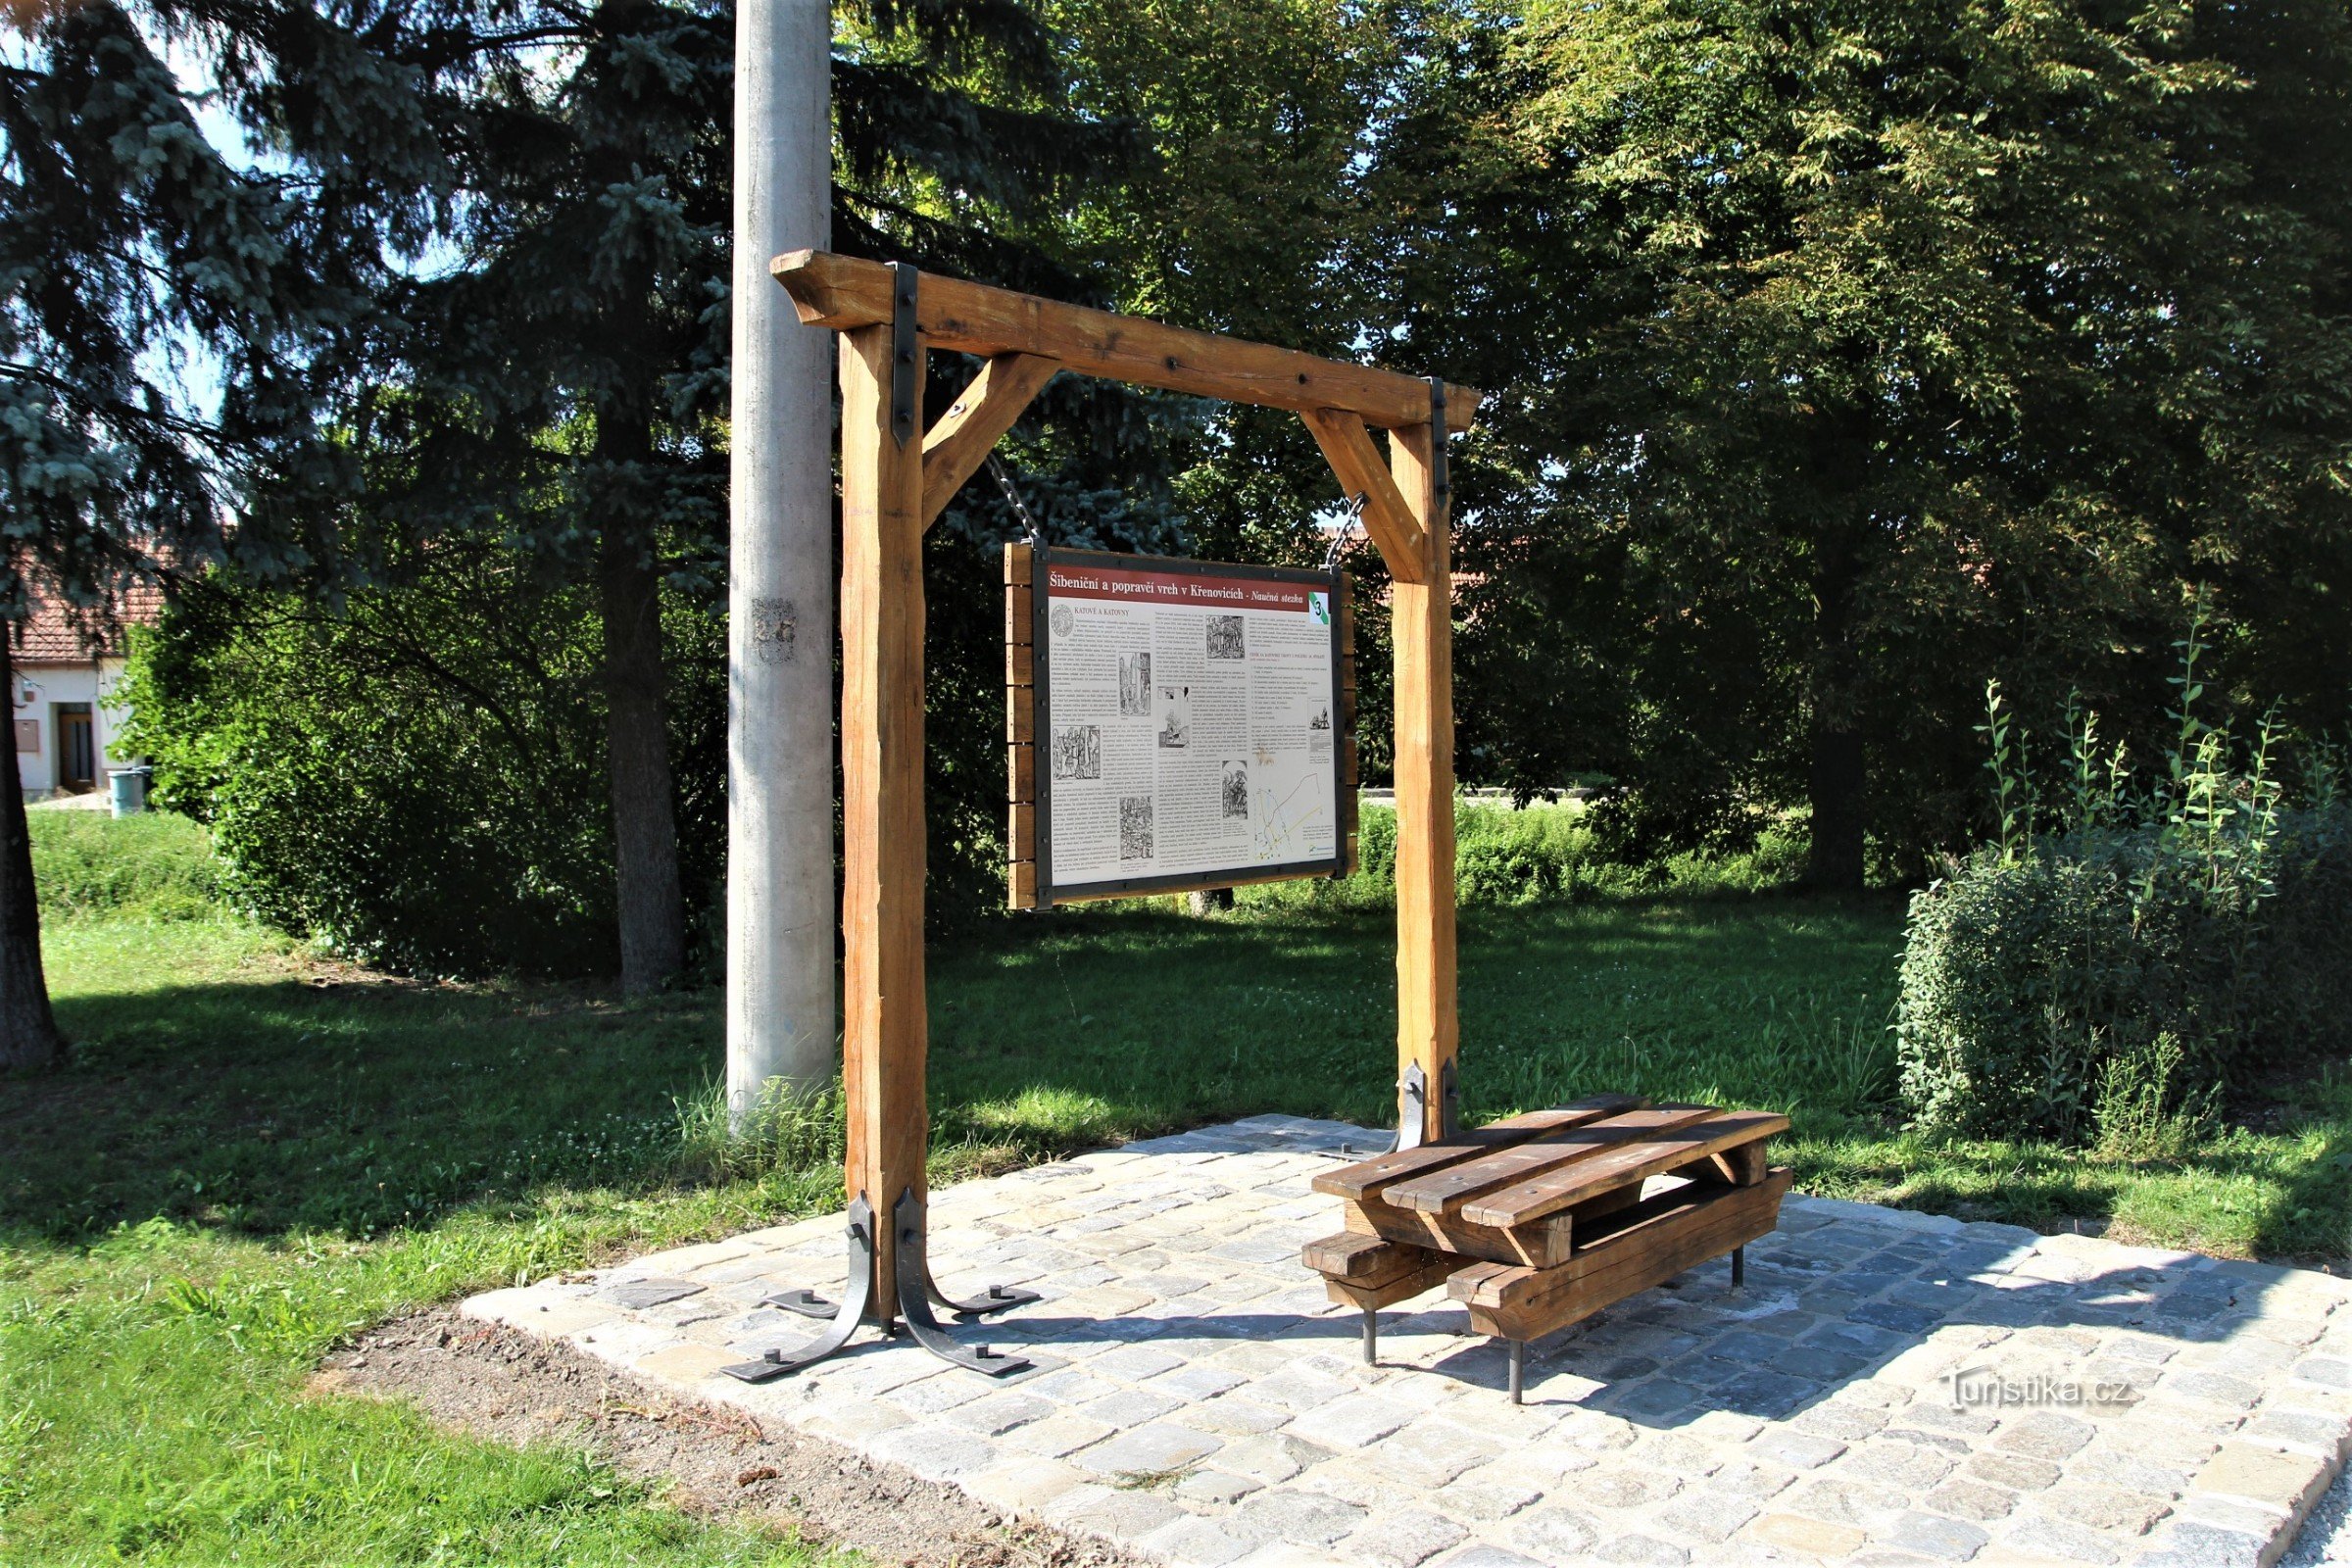 The third stop of the educational trail is at the beginning of Mlýnská street